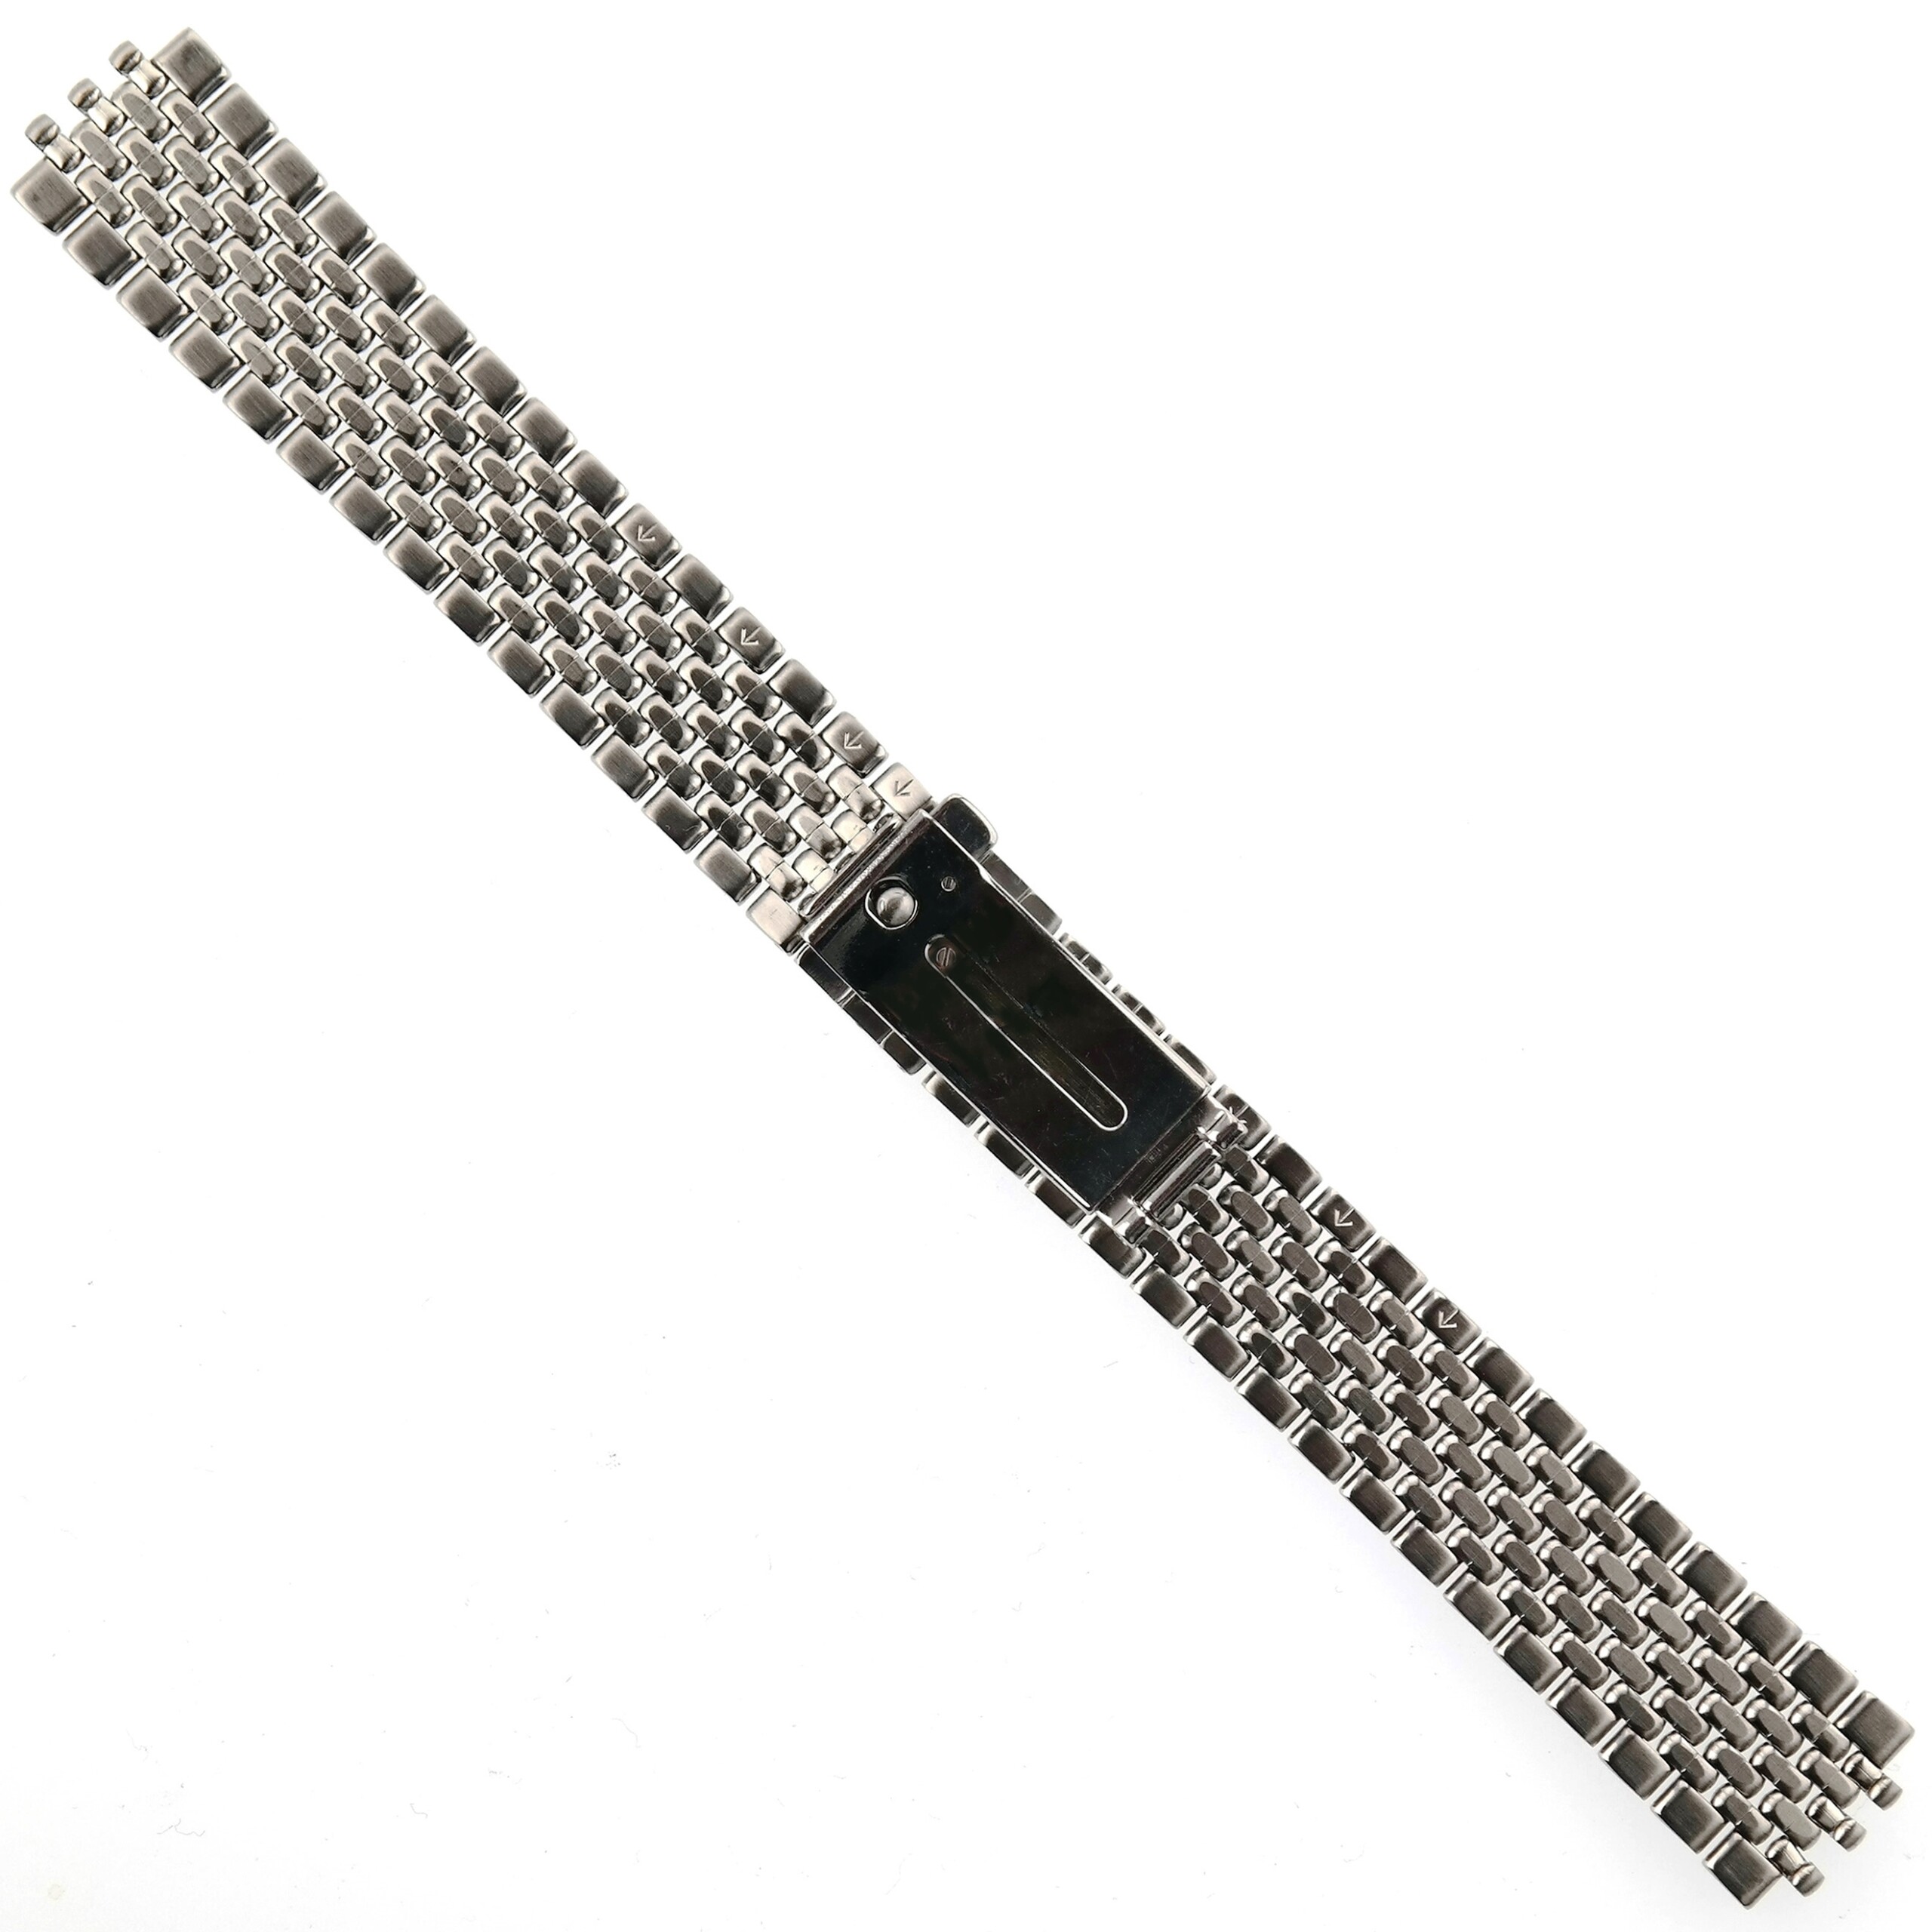 OMEGA - Stainless Steel "Beads Of Rice" Watch Bracelet 1451/439.1 - 18 mm